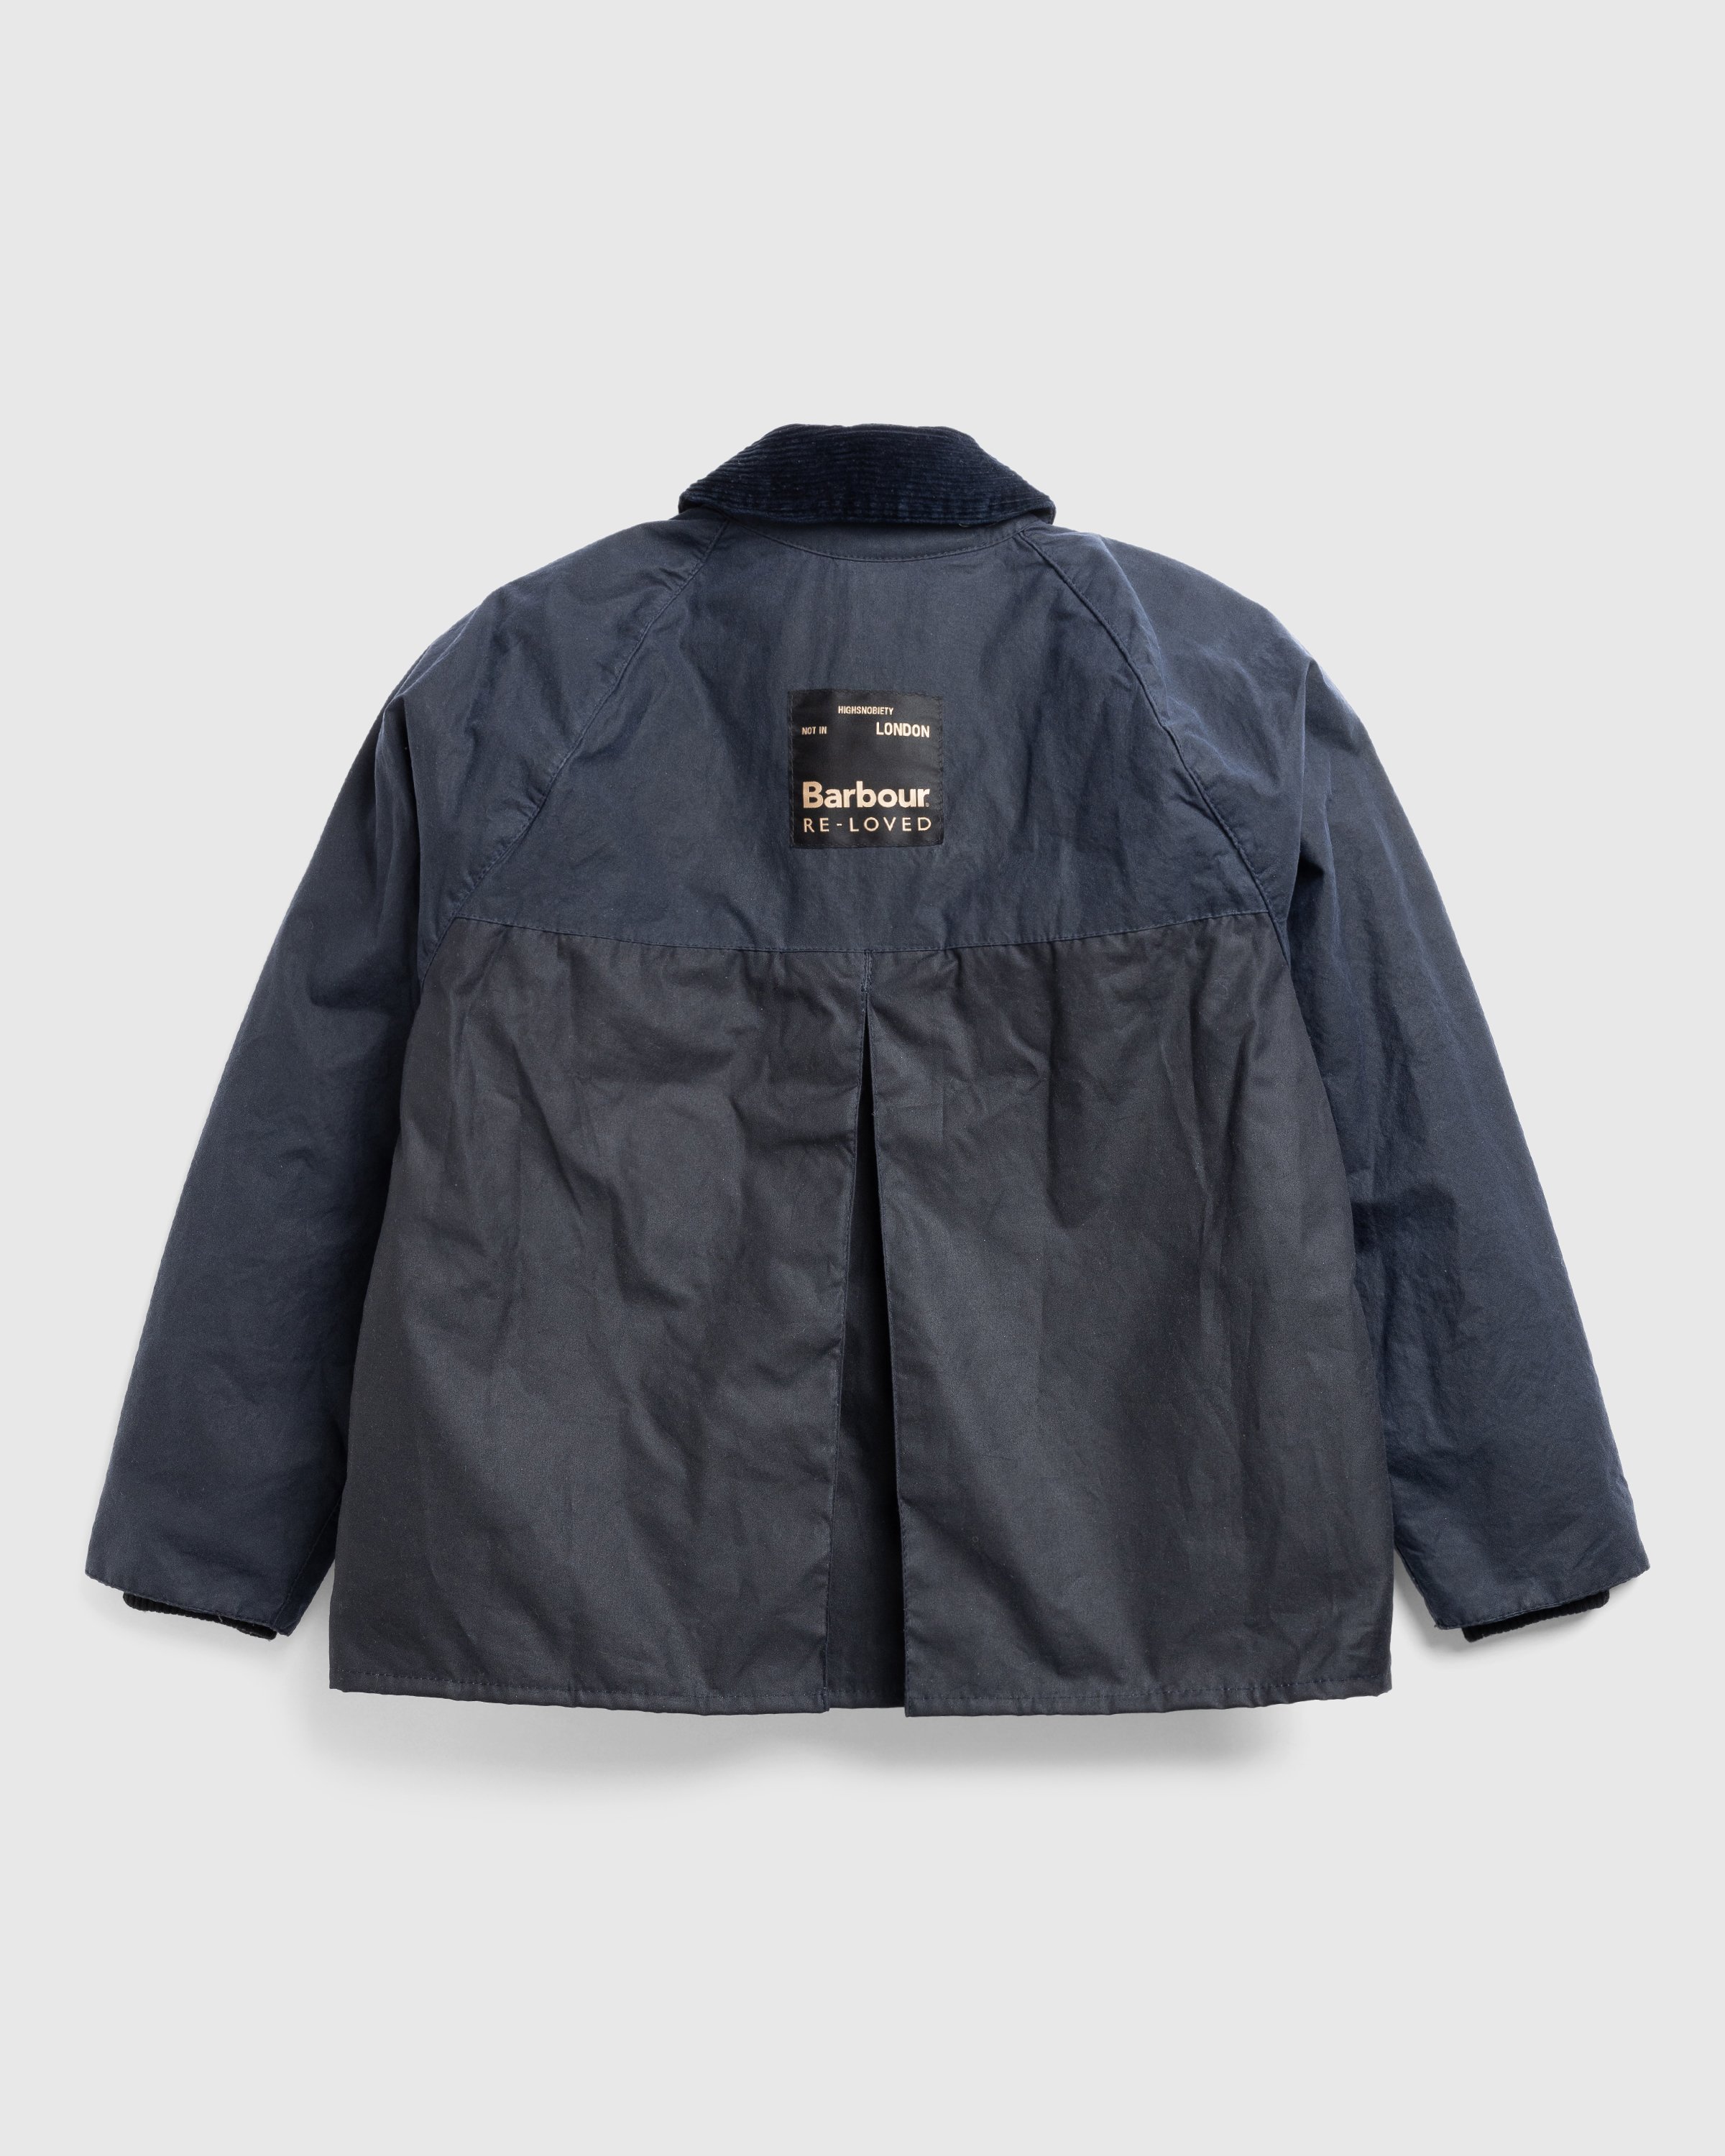 Barbour x Highsnobiety - Re-Loved Cropped Bedale Jacket 1 - 38 - Navy - Clothing - Olive - Image 2